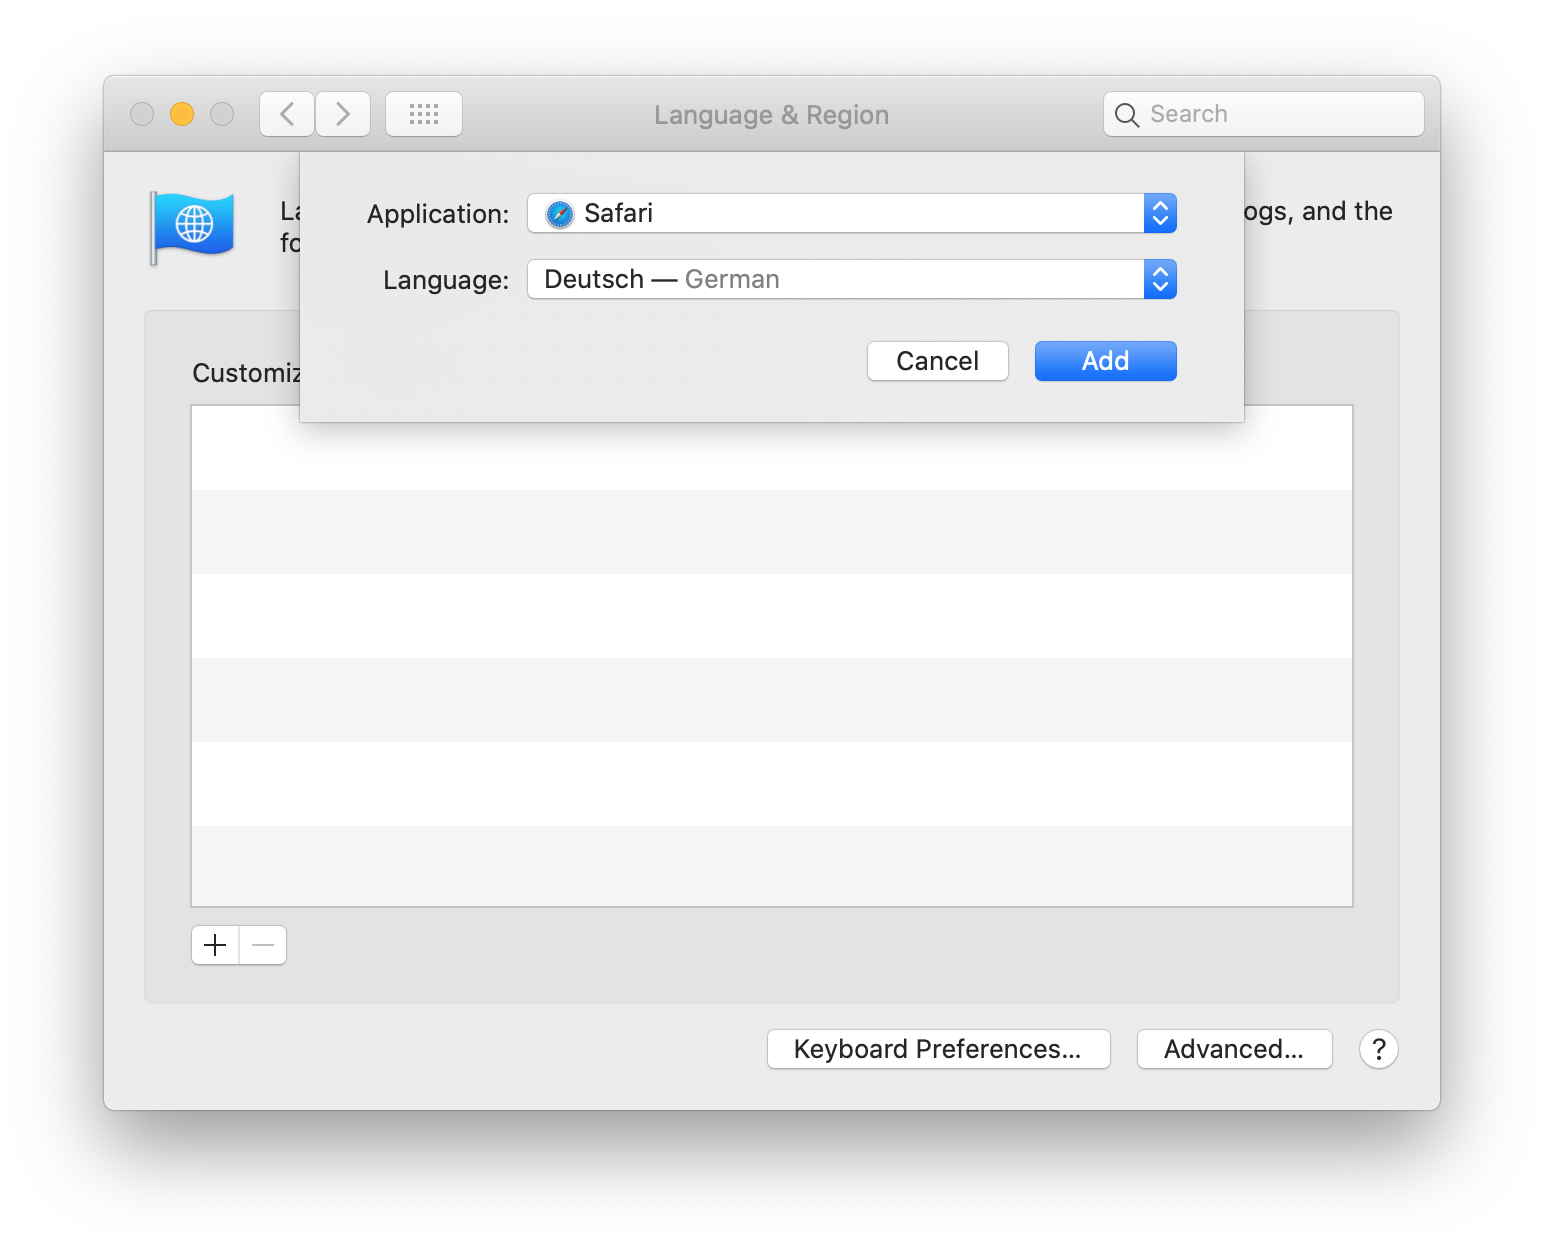 A screenshot of the Mac Language & Region settings. A window to select an application and a default language is open. Safari has been selected from the Application drop-down menu options, and German has been selected from the Language drop-down menu options.